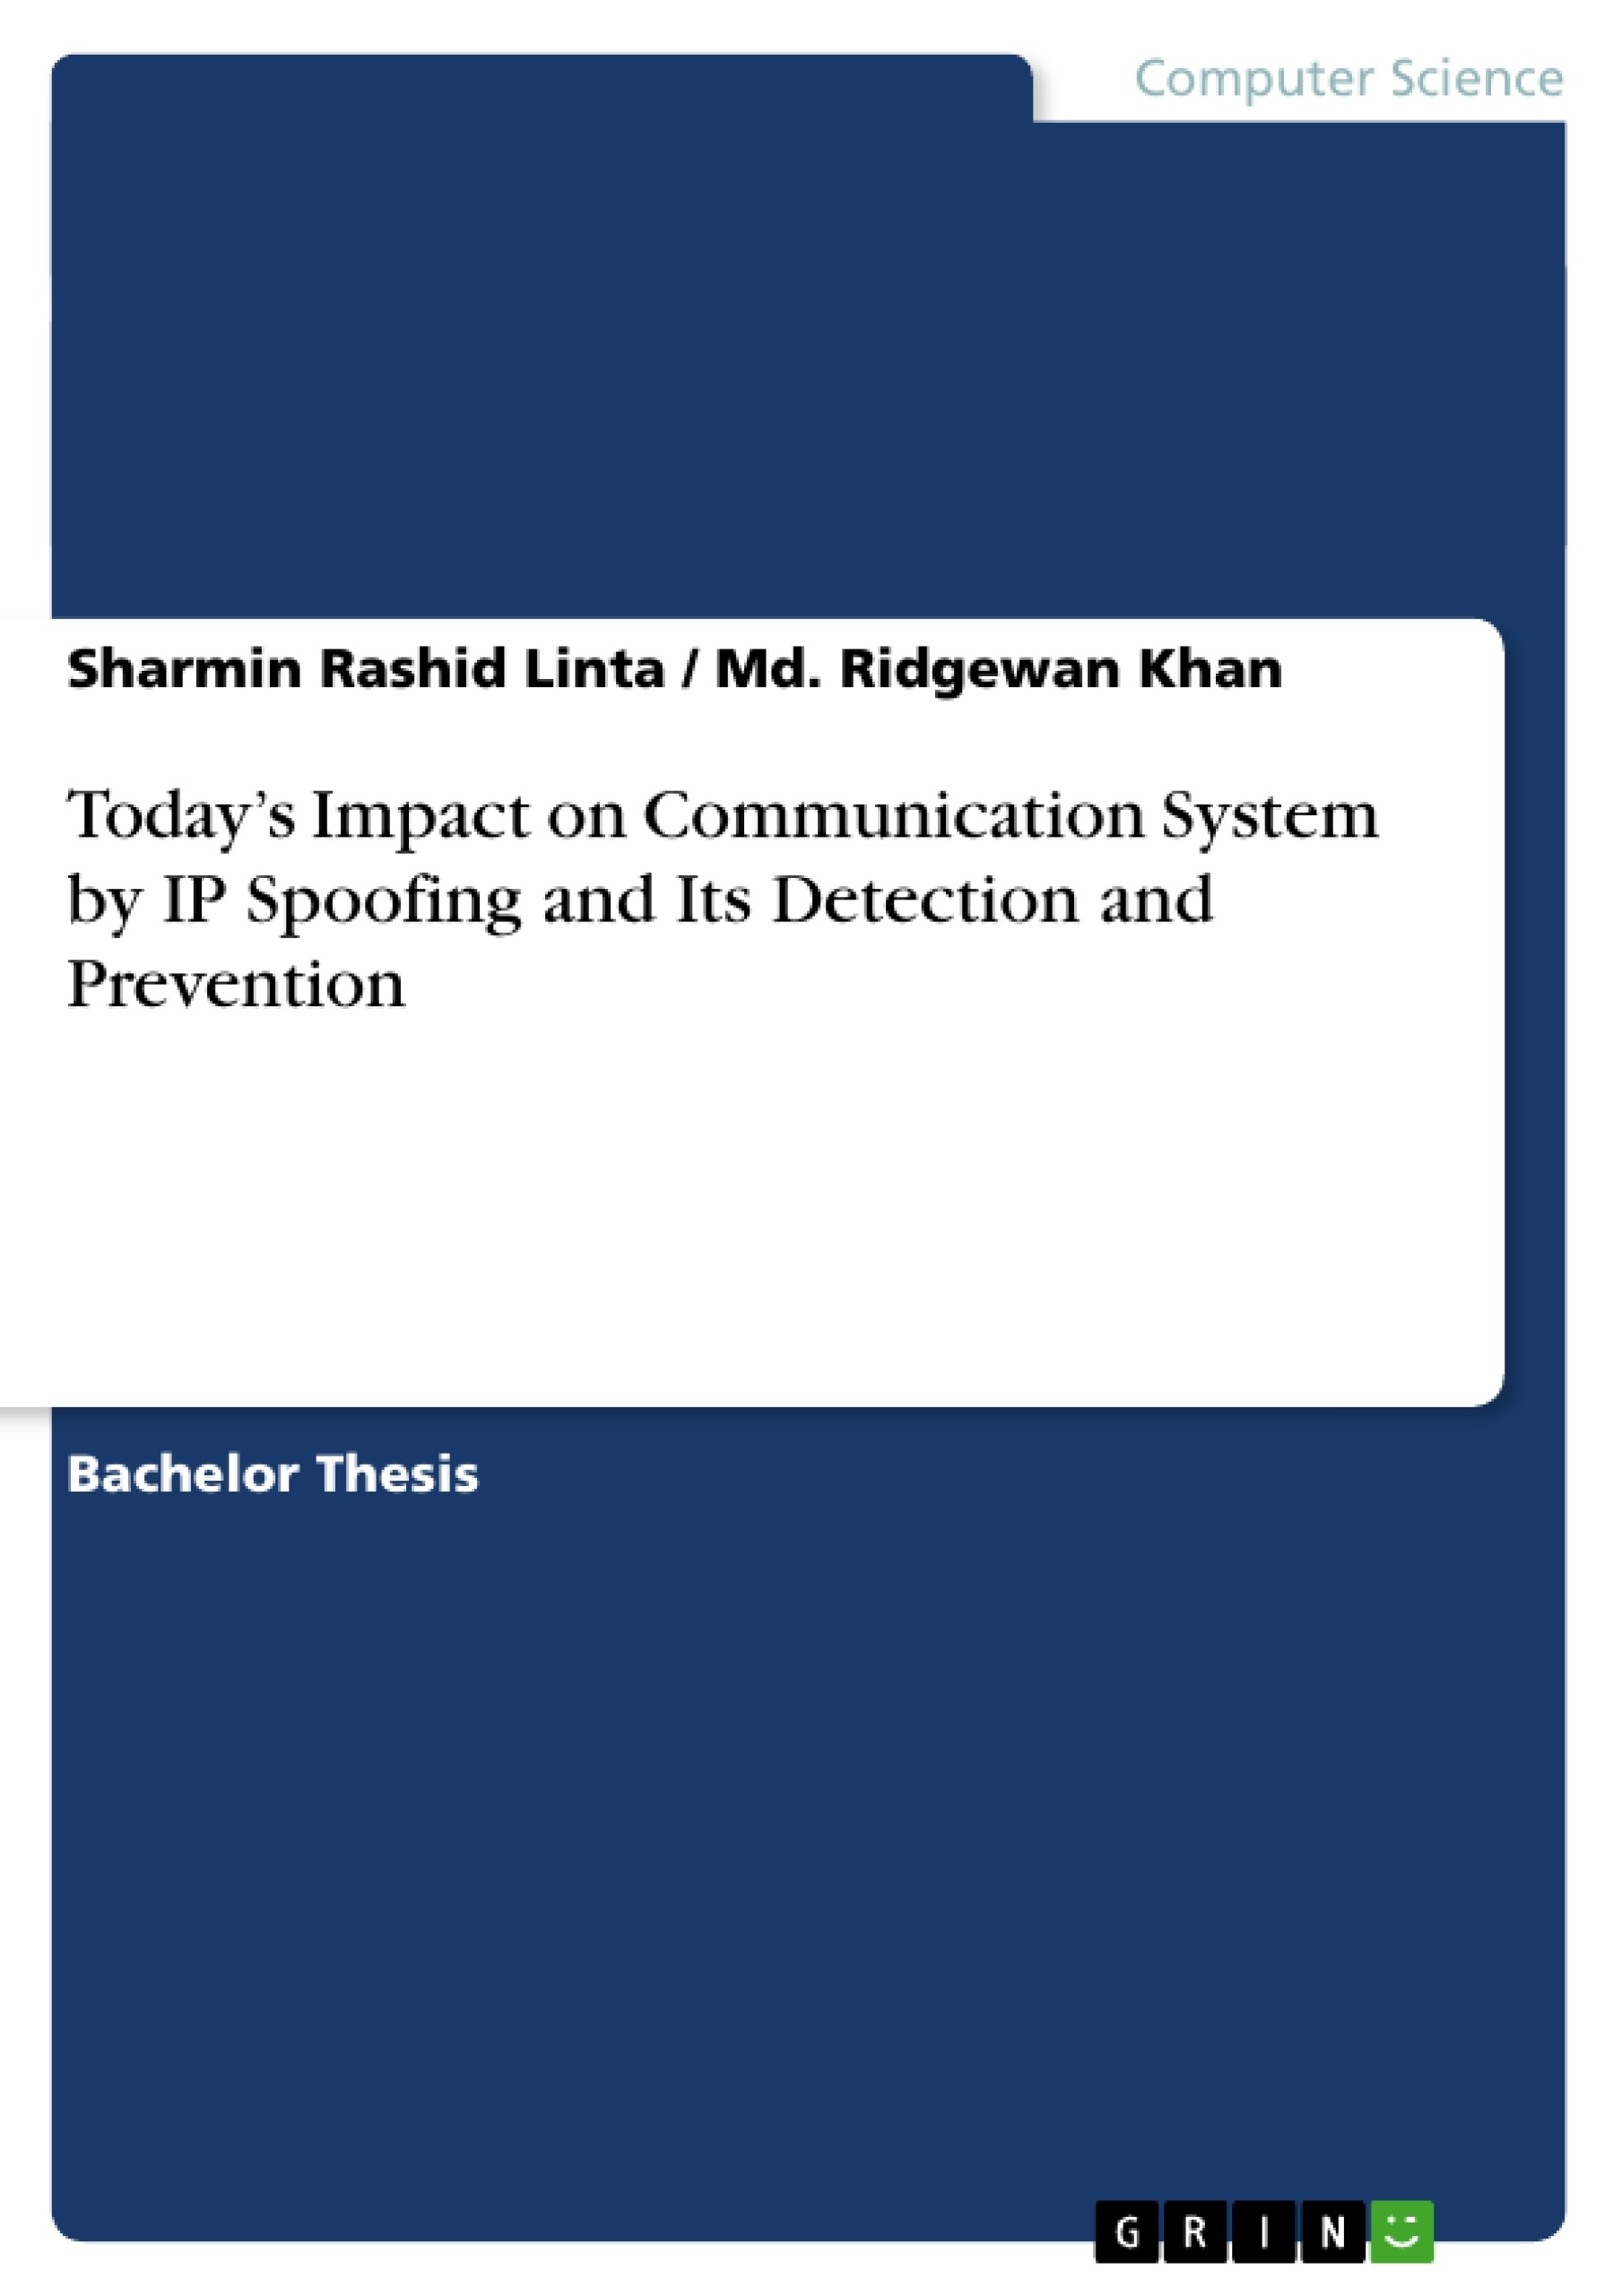 Título: Today’s Impact on Communication System by IP Spoofing and Its Detection and Prevention